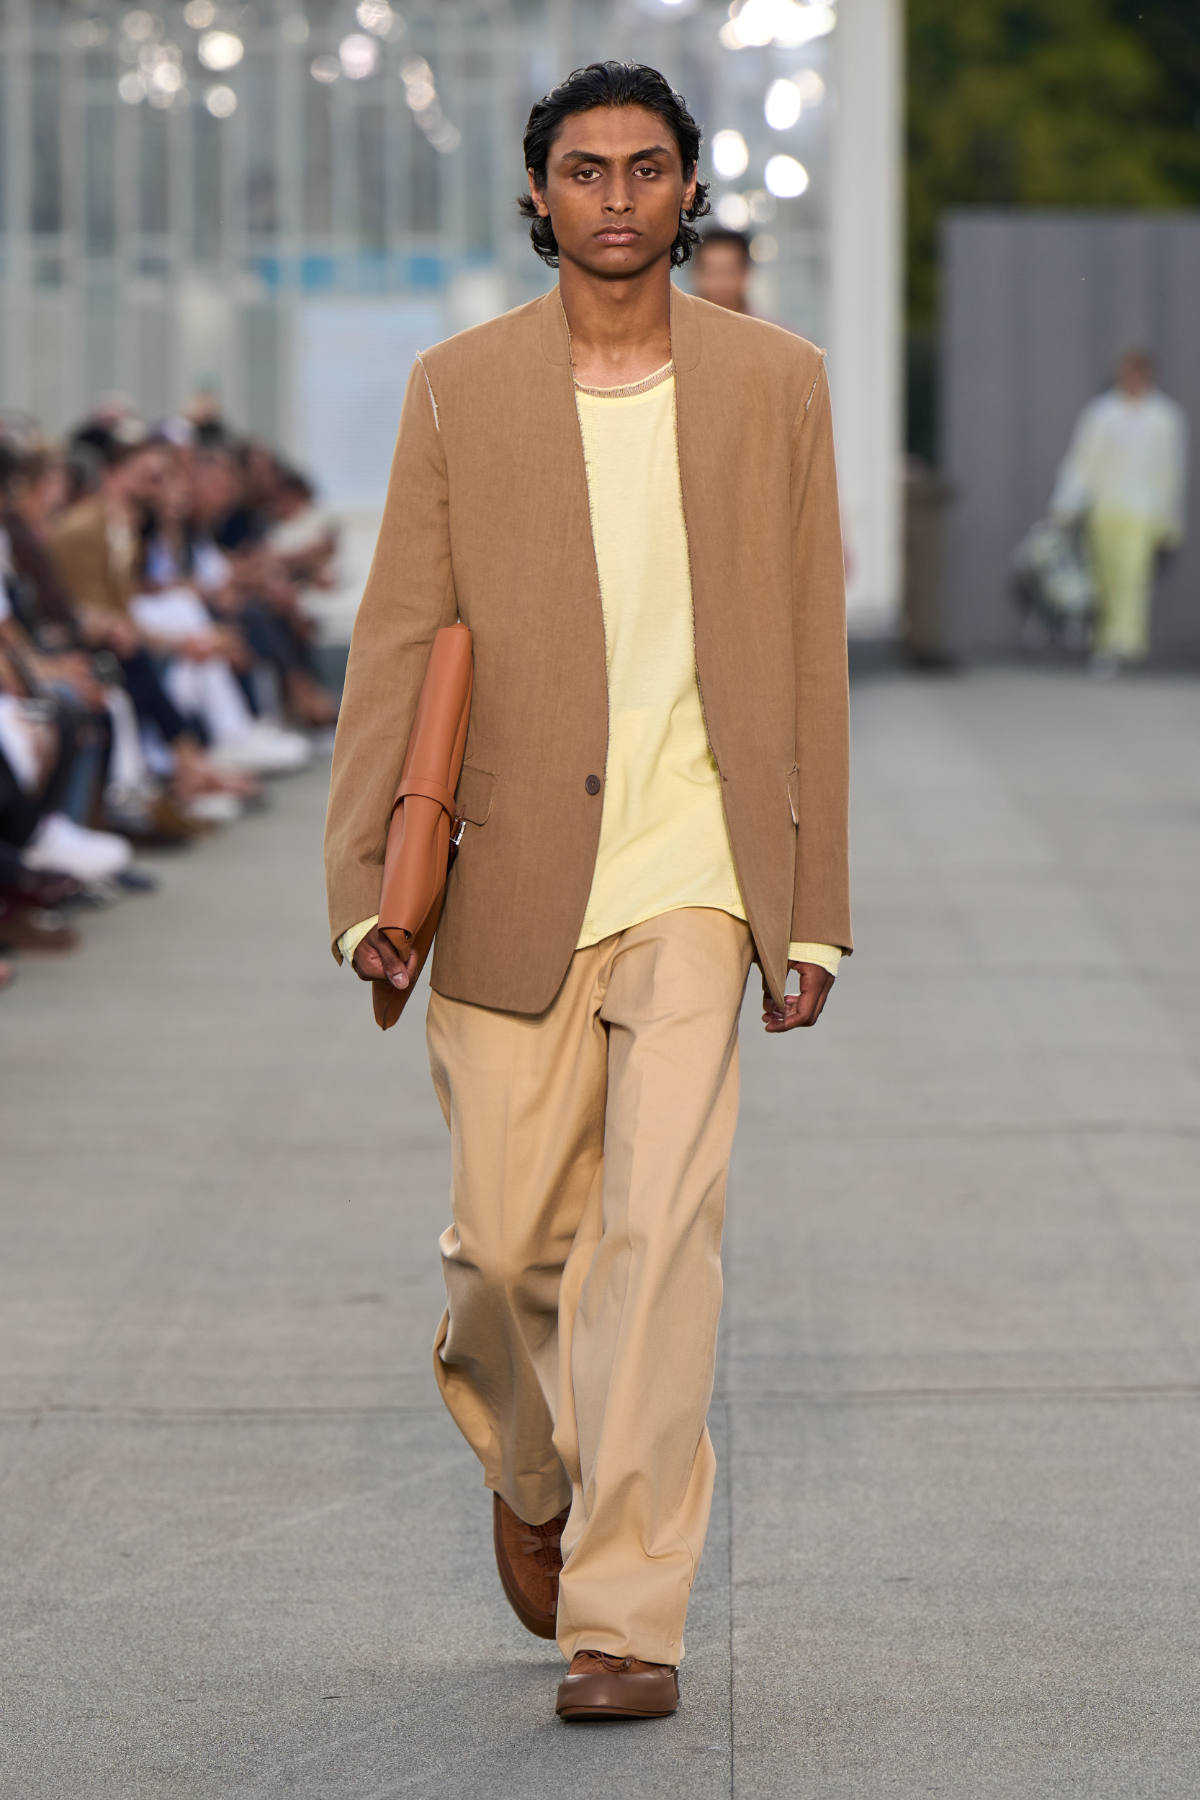 Zegna Presents Its New Summer 2023 Menswear Collection: Born In Oasi Zegna